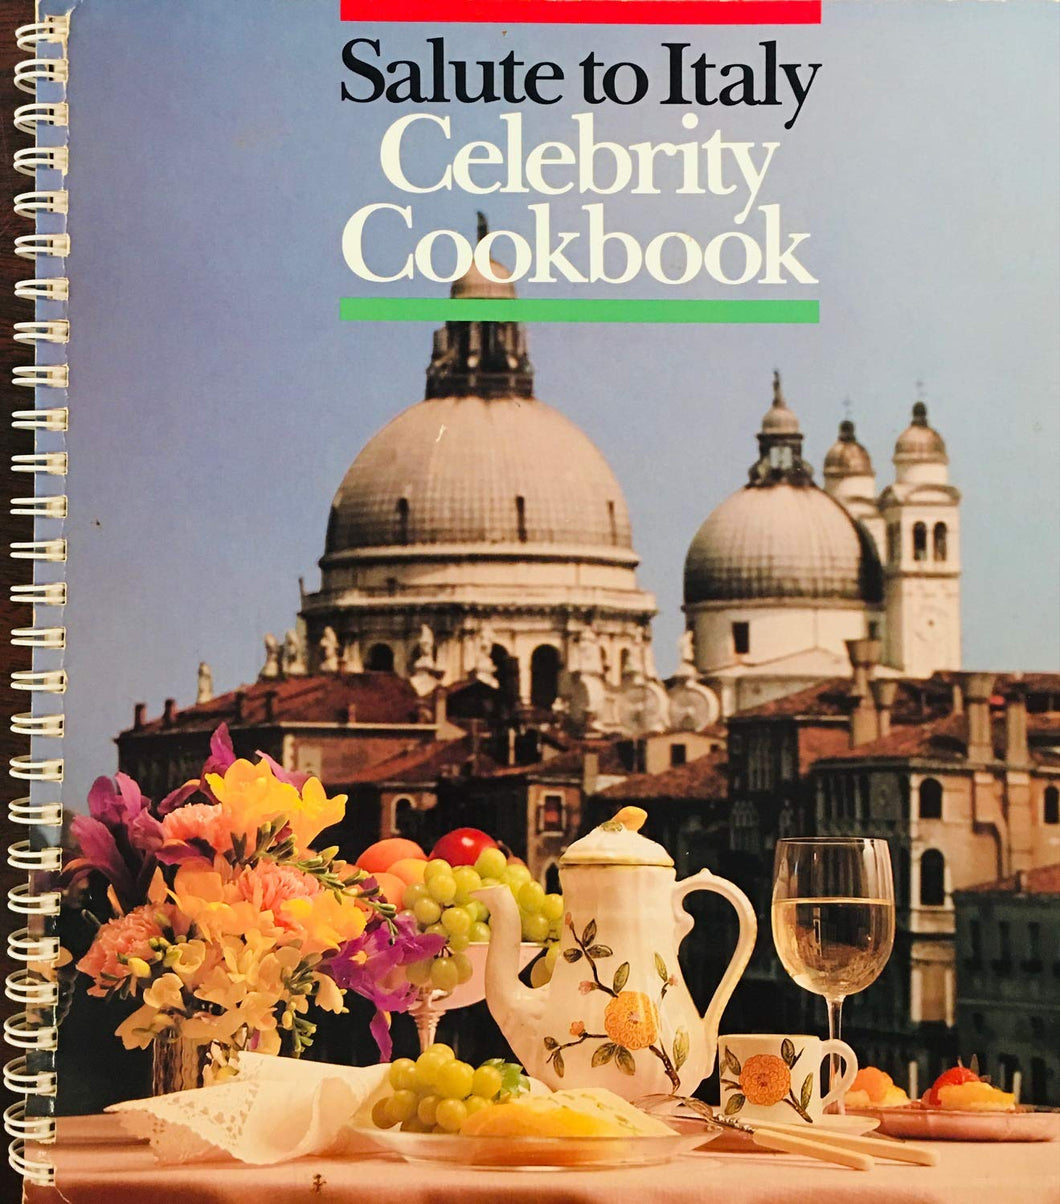 Salute to Italy Celebrity Cookbook edited by Peggy Healy and Iris Ihde Frey